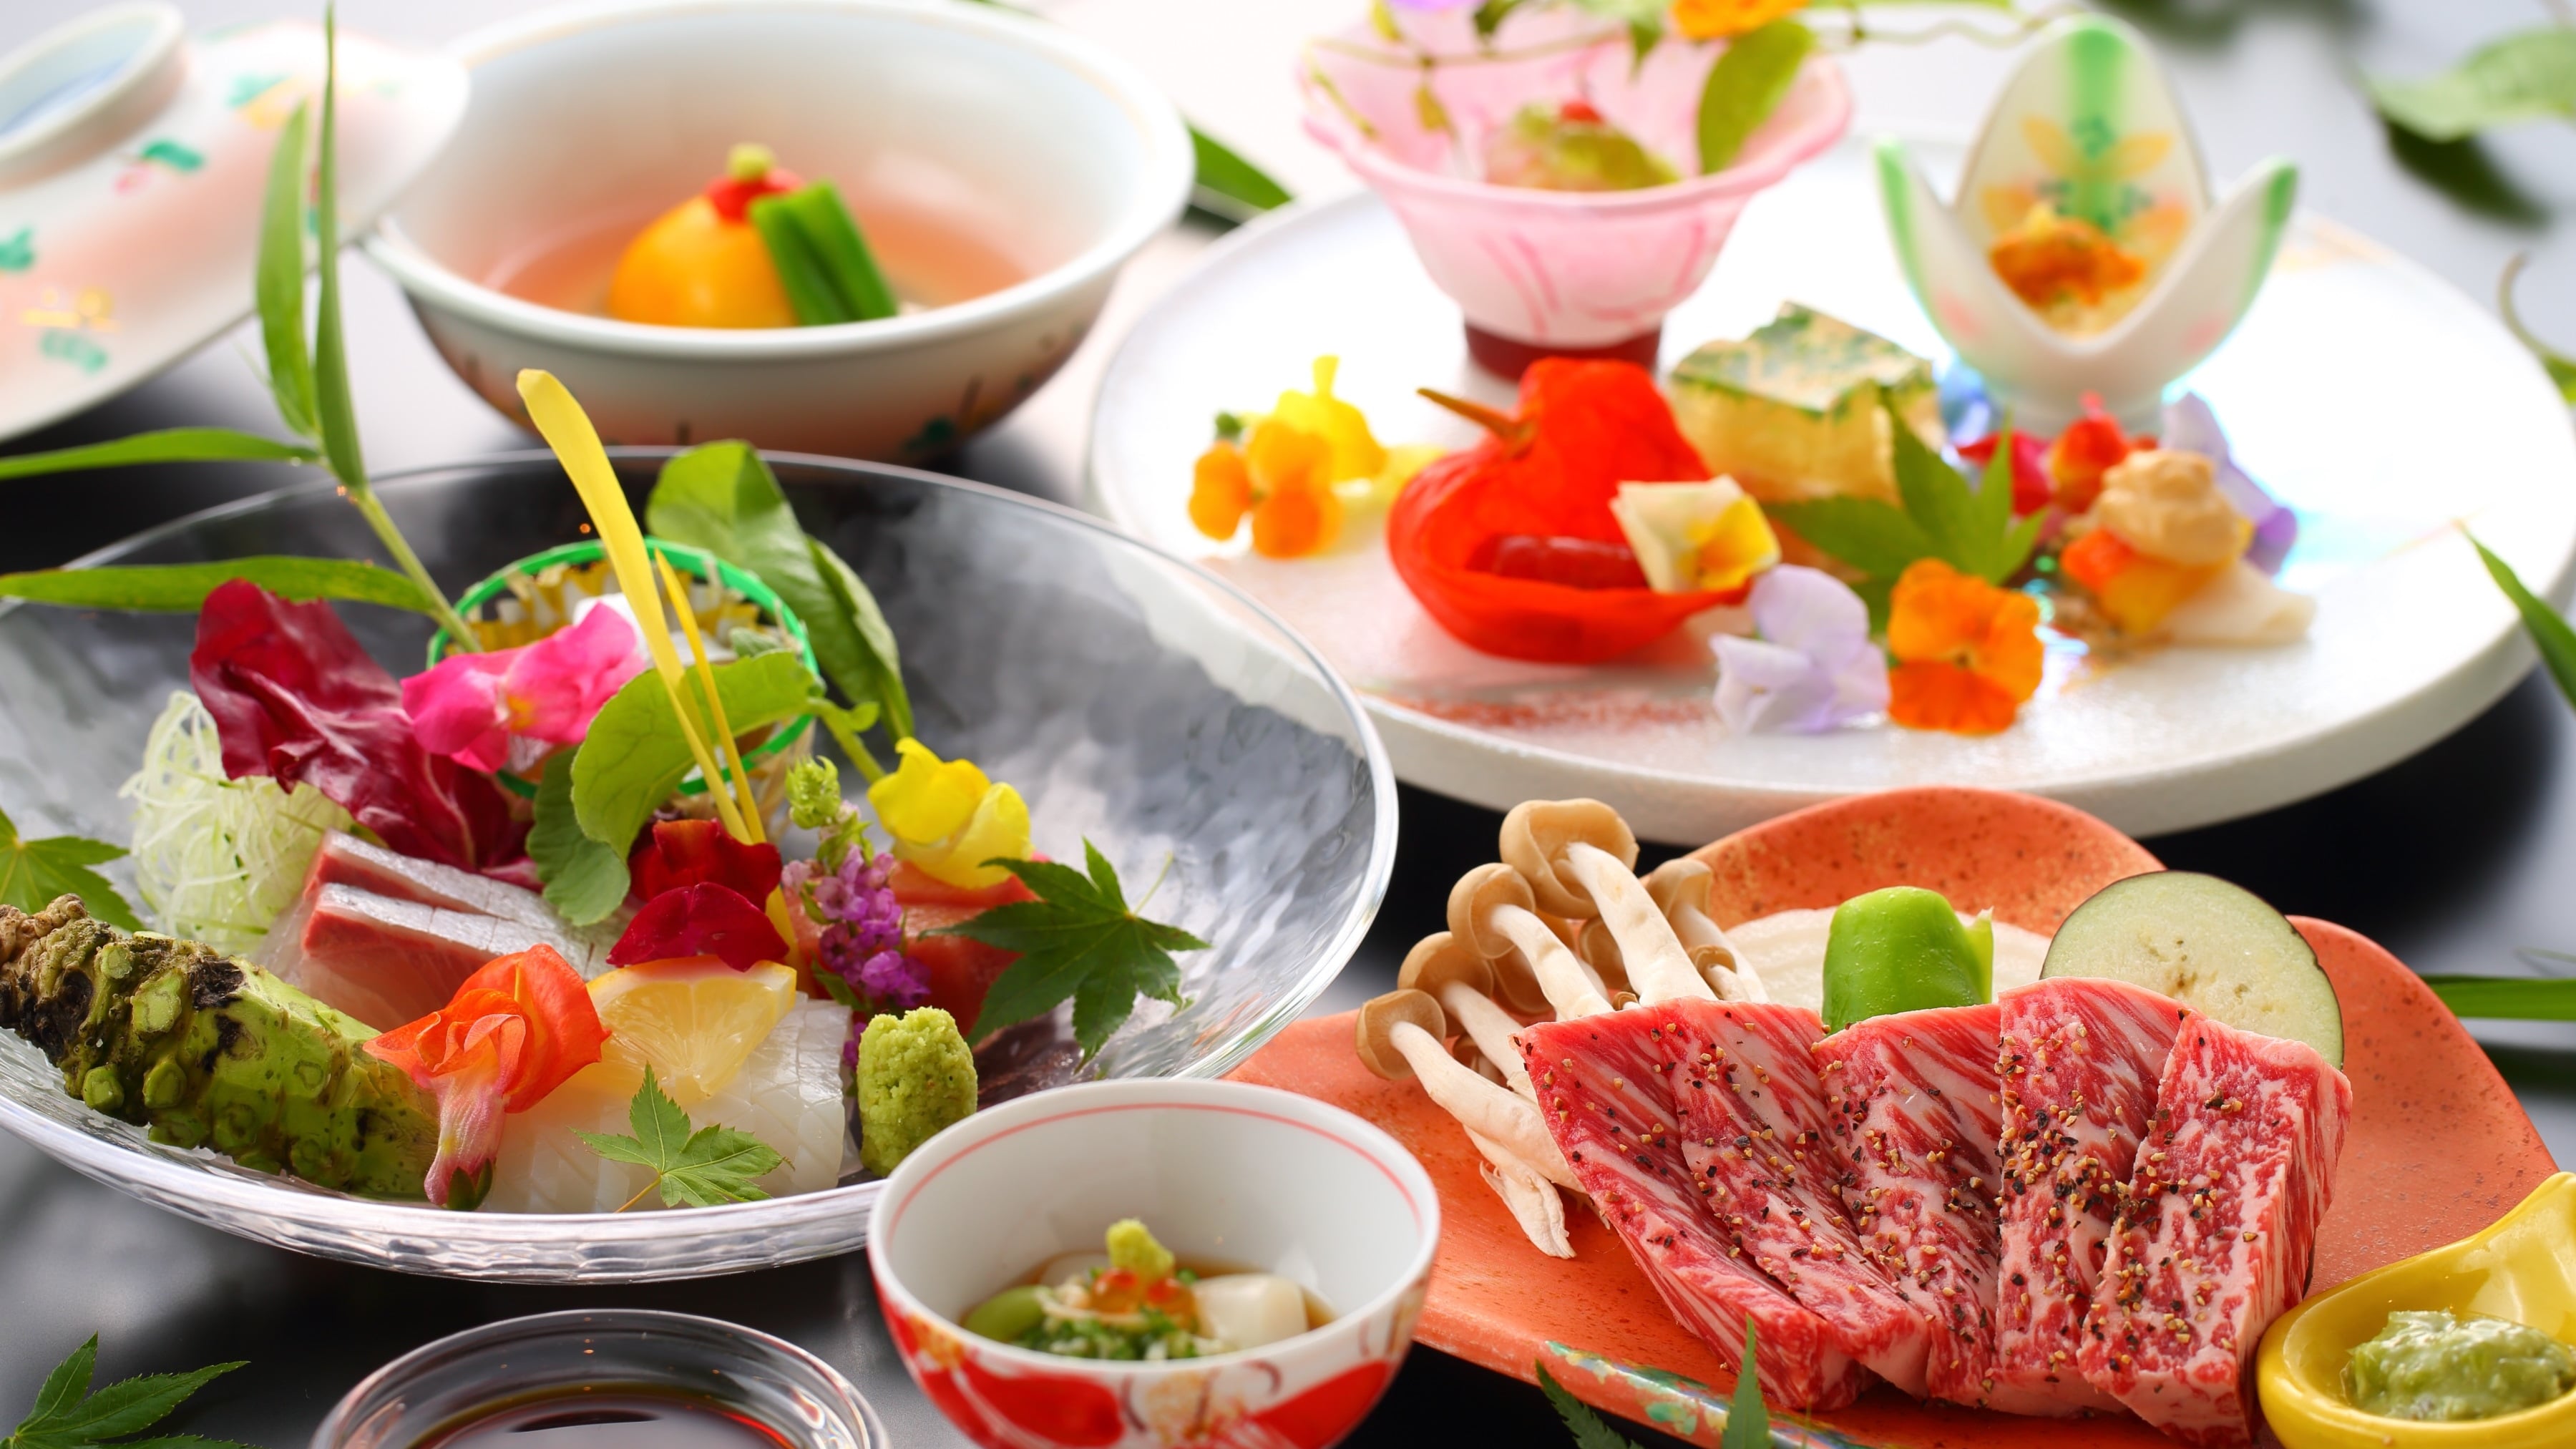 [Summer Kaiseki] Standard kaiseki in the Hanayu area. Chef-focused dishes / examples